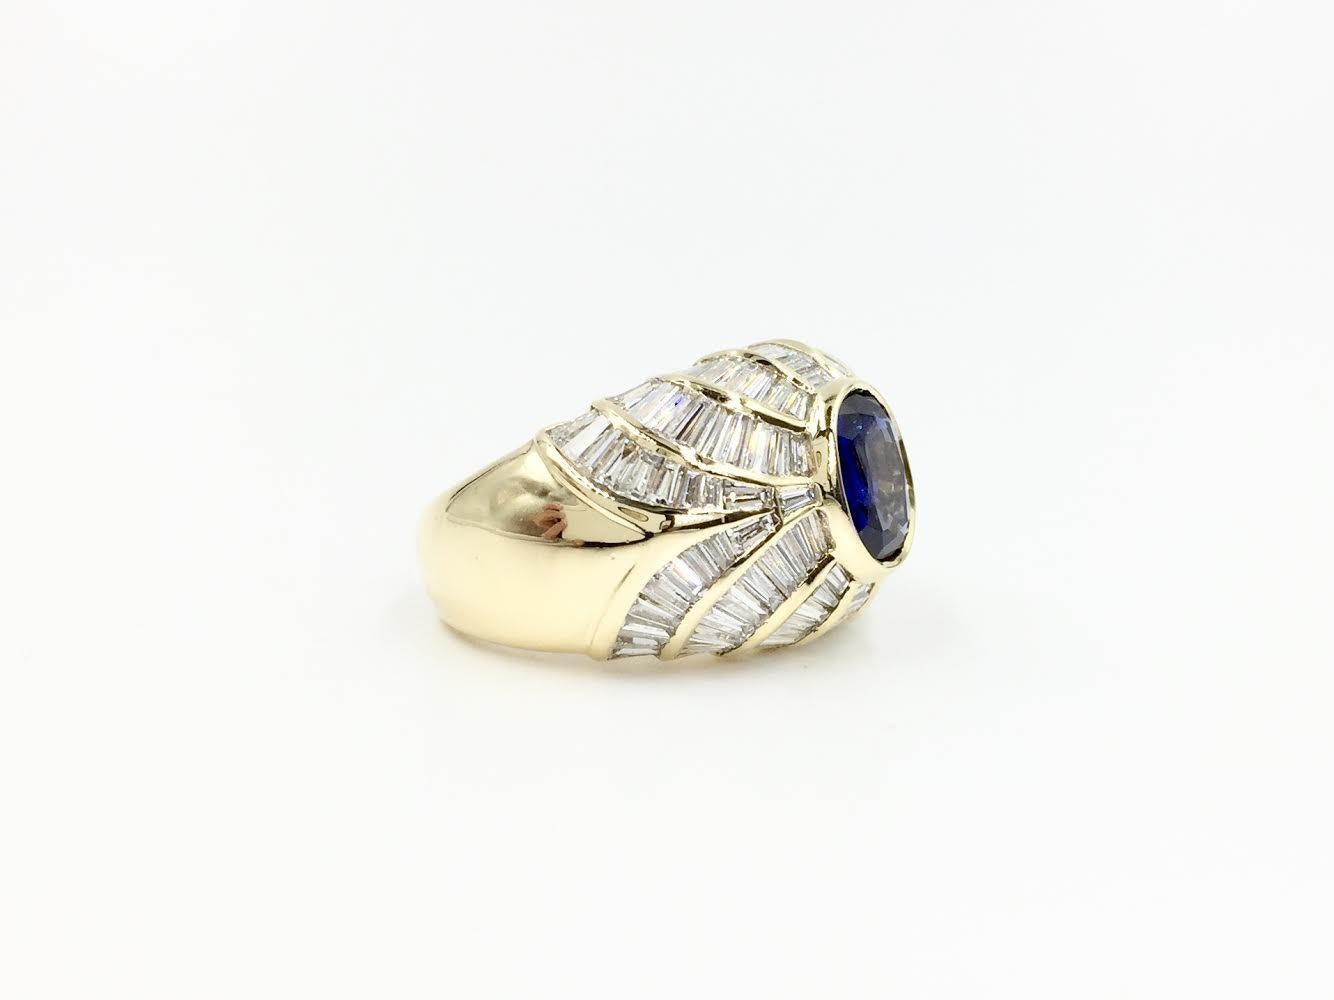 A fabulous find! This Art Deco inspired 18 karat yellow gold domed cocktail ring features 3.43 carats of beautiful baguette diamonds, perfectly channel set in a unique pattern across the top of the ring and a gorgeous bezel set oval blue sapphire